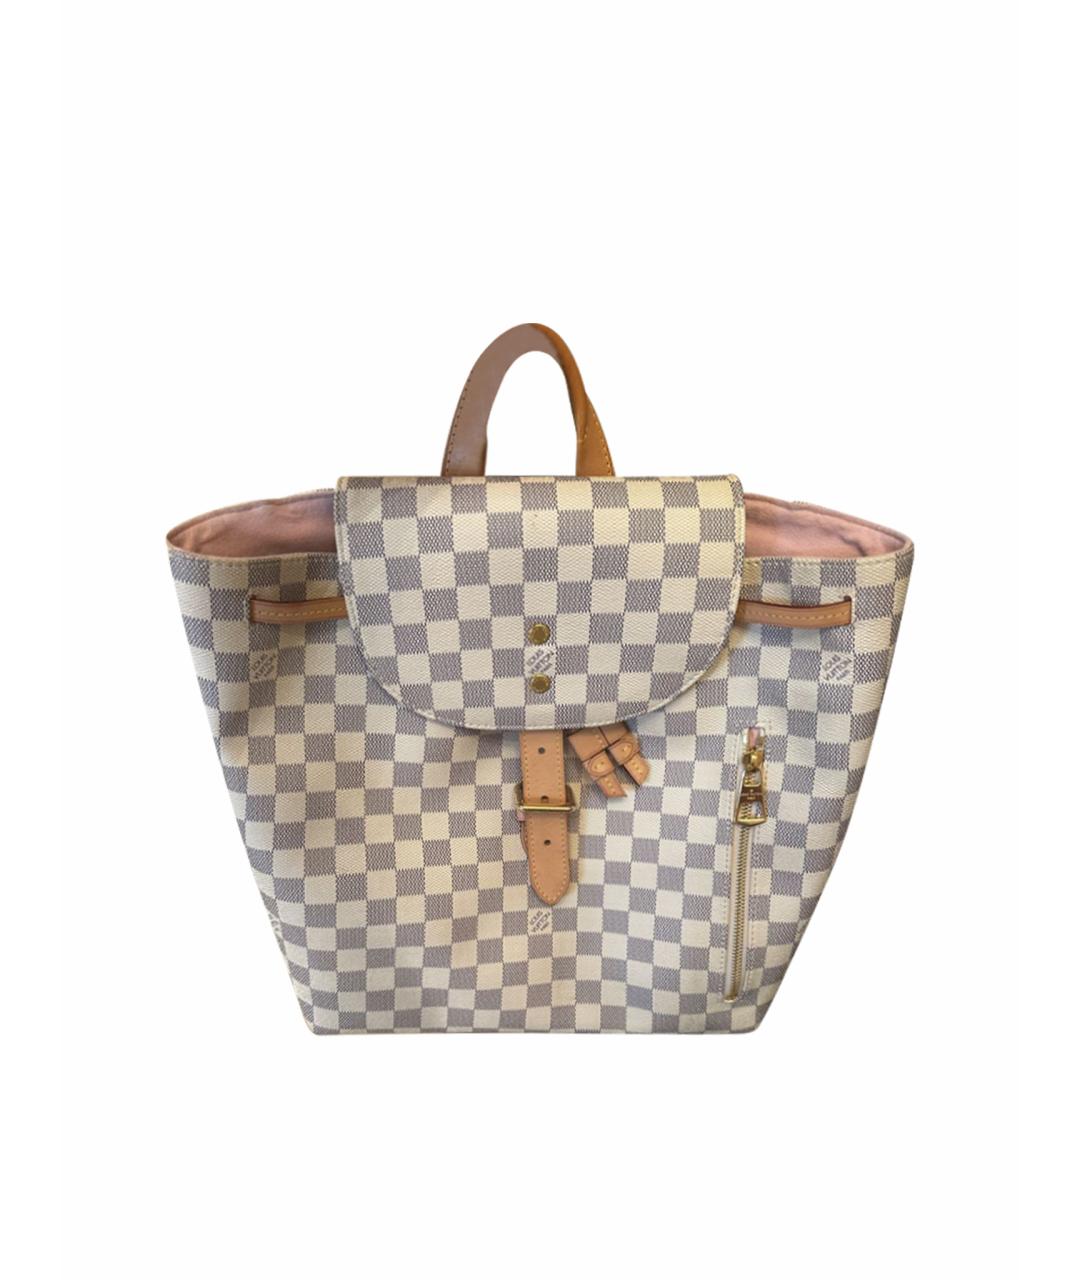 LOUIS VUITTON PRE-OWNED Белый рюкзак, фото 1